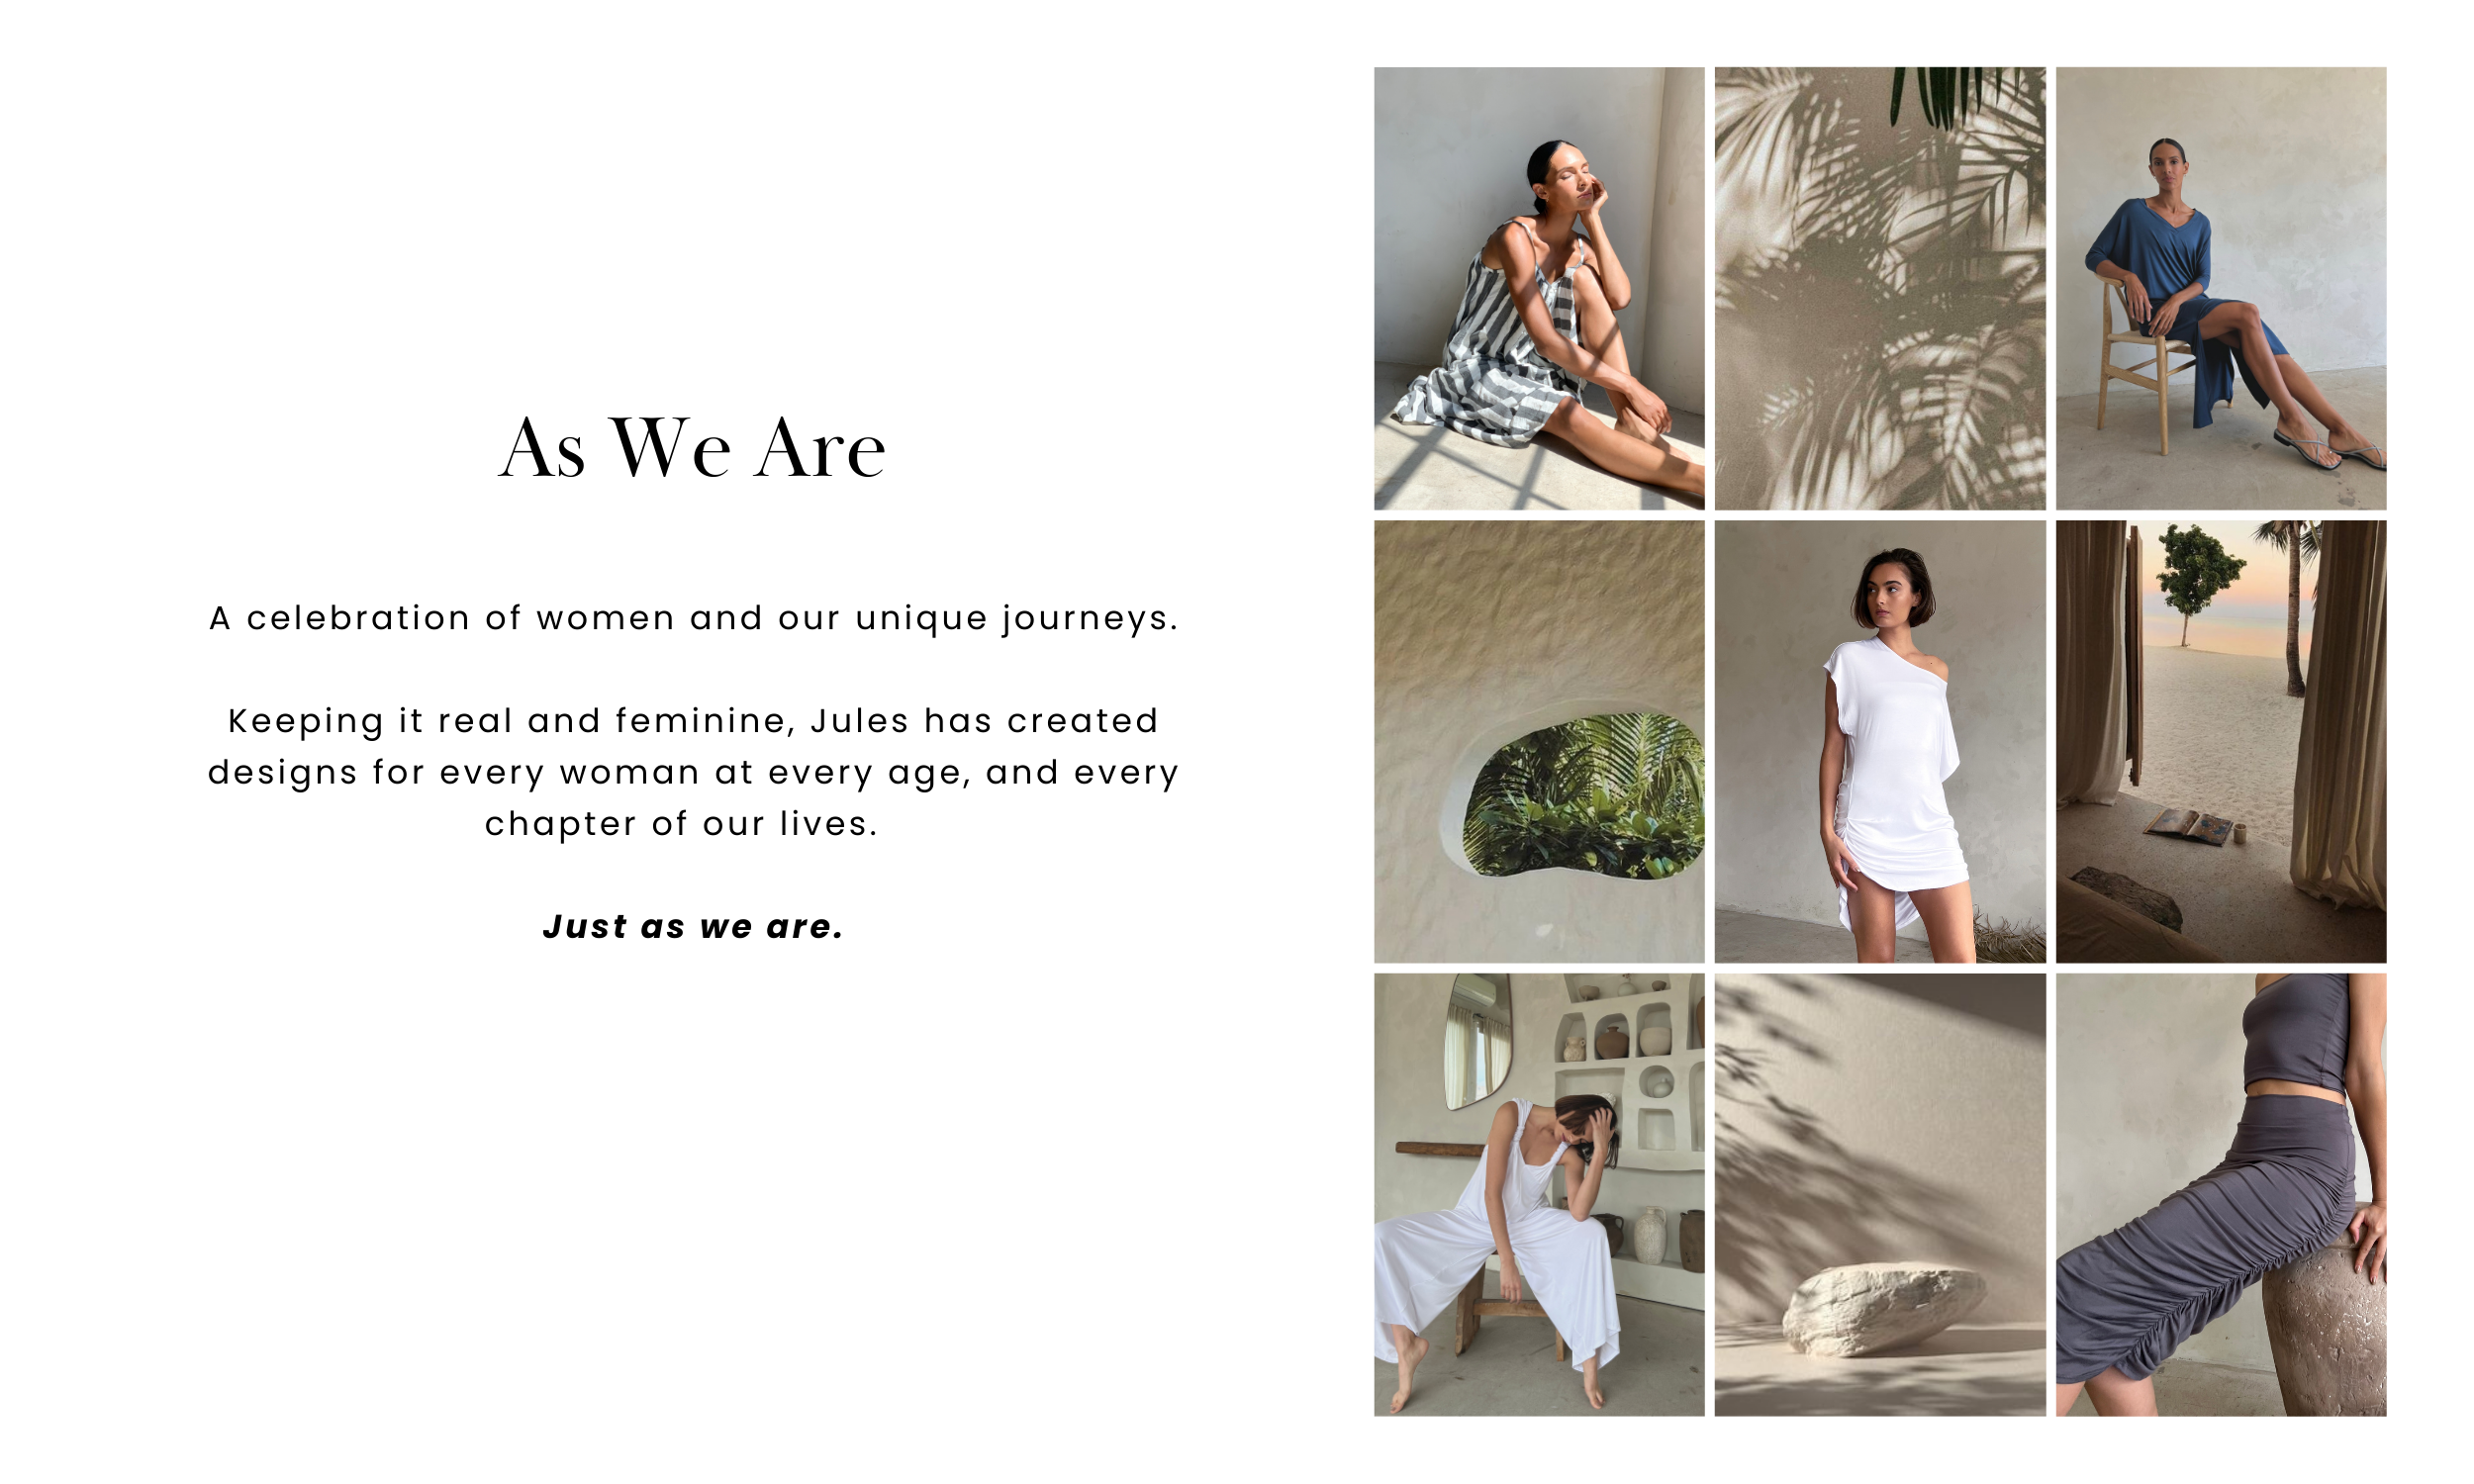 As We Are.  A celebration of women as they are at every age.  Keeping it real and feminine, Jules has created designs for effortless summer styles that can transform to a perfect night occasion.  Mixed with bright pops of color, stunning sets, and essential styles for any kind of warm weather day.  Jules is for every woman, every shape, every age, and every occasion.  Just as we are.